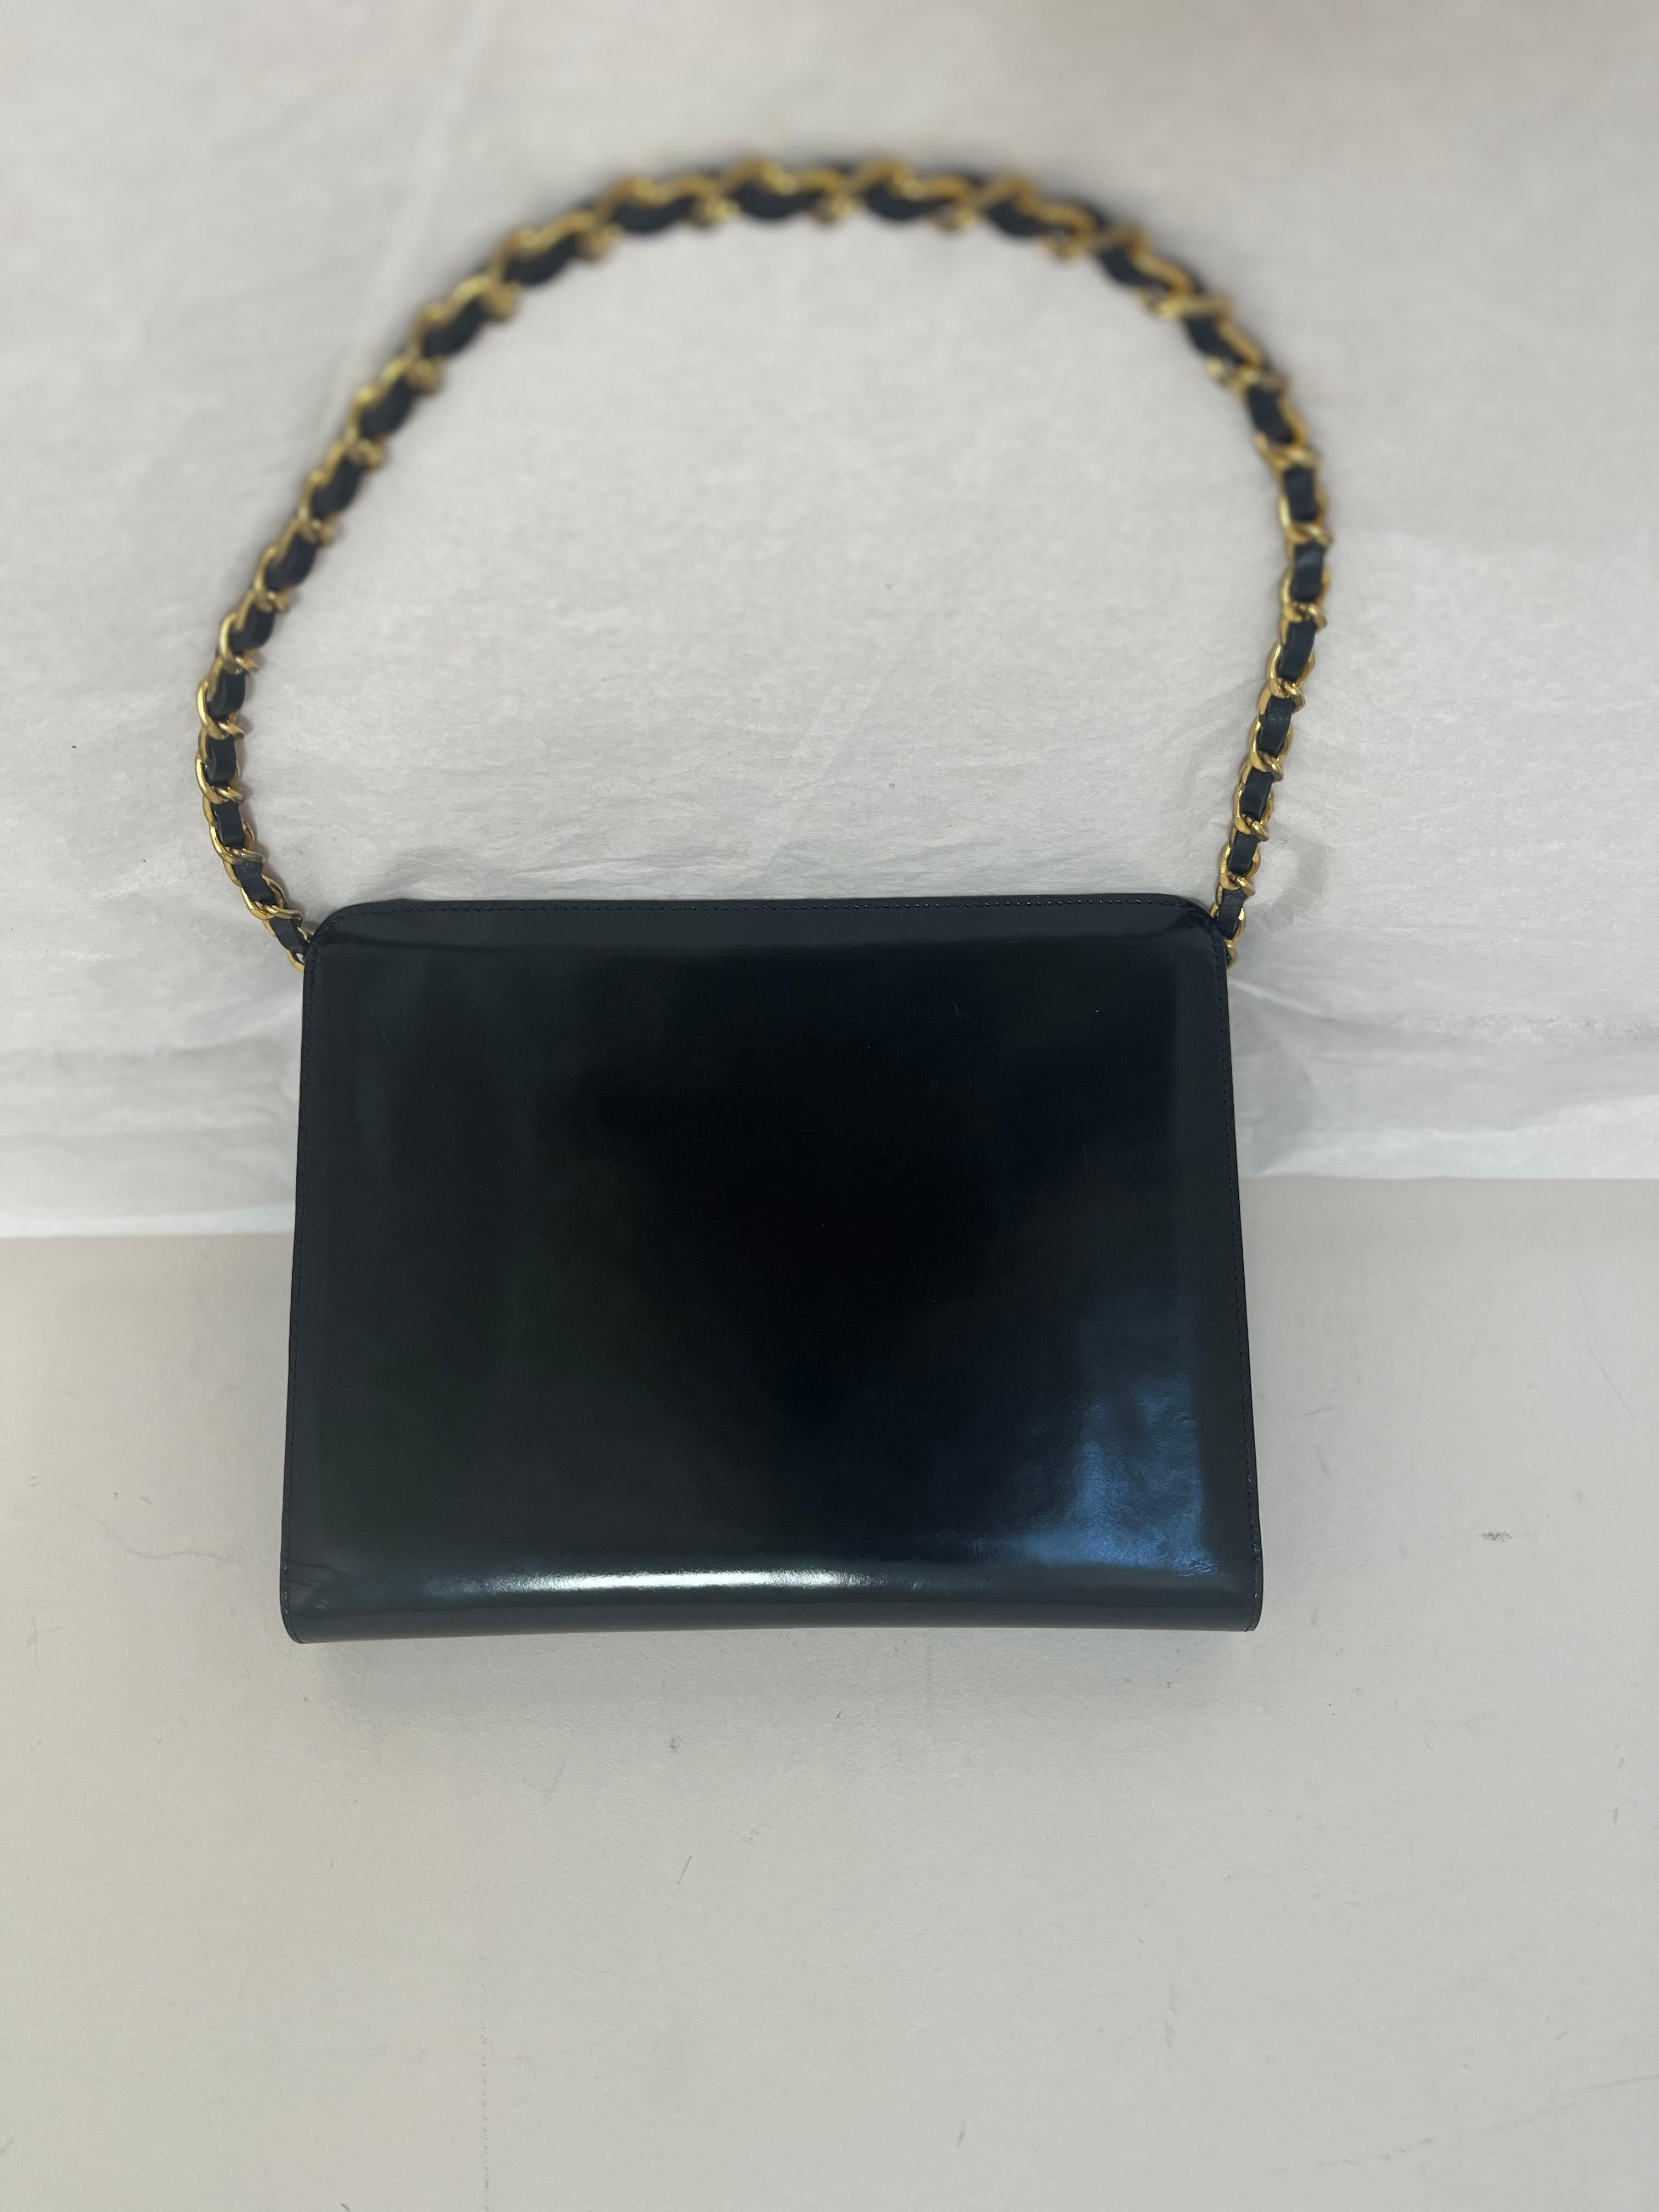 1986-88 Chanel Black Patent Leather Handbag w/COA and Card For Sale 1